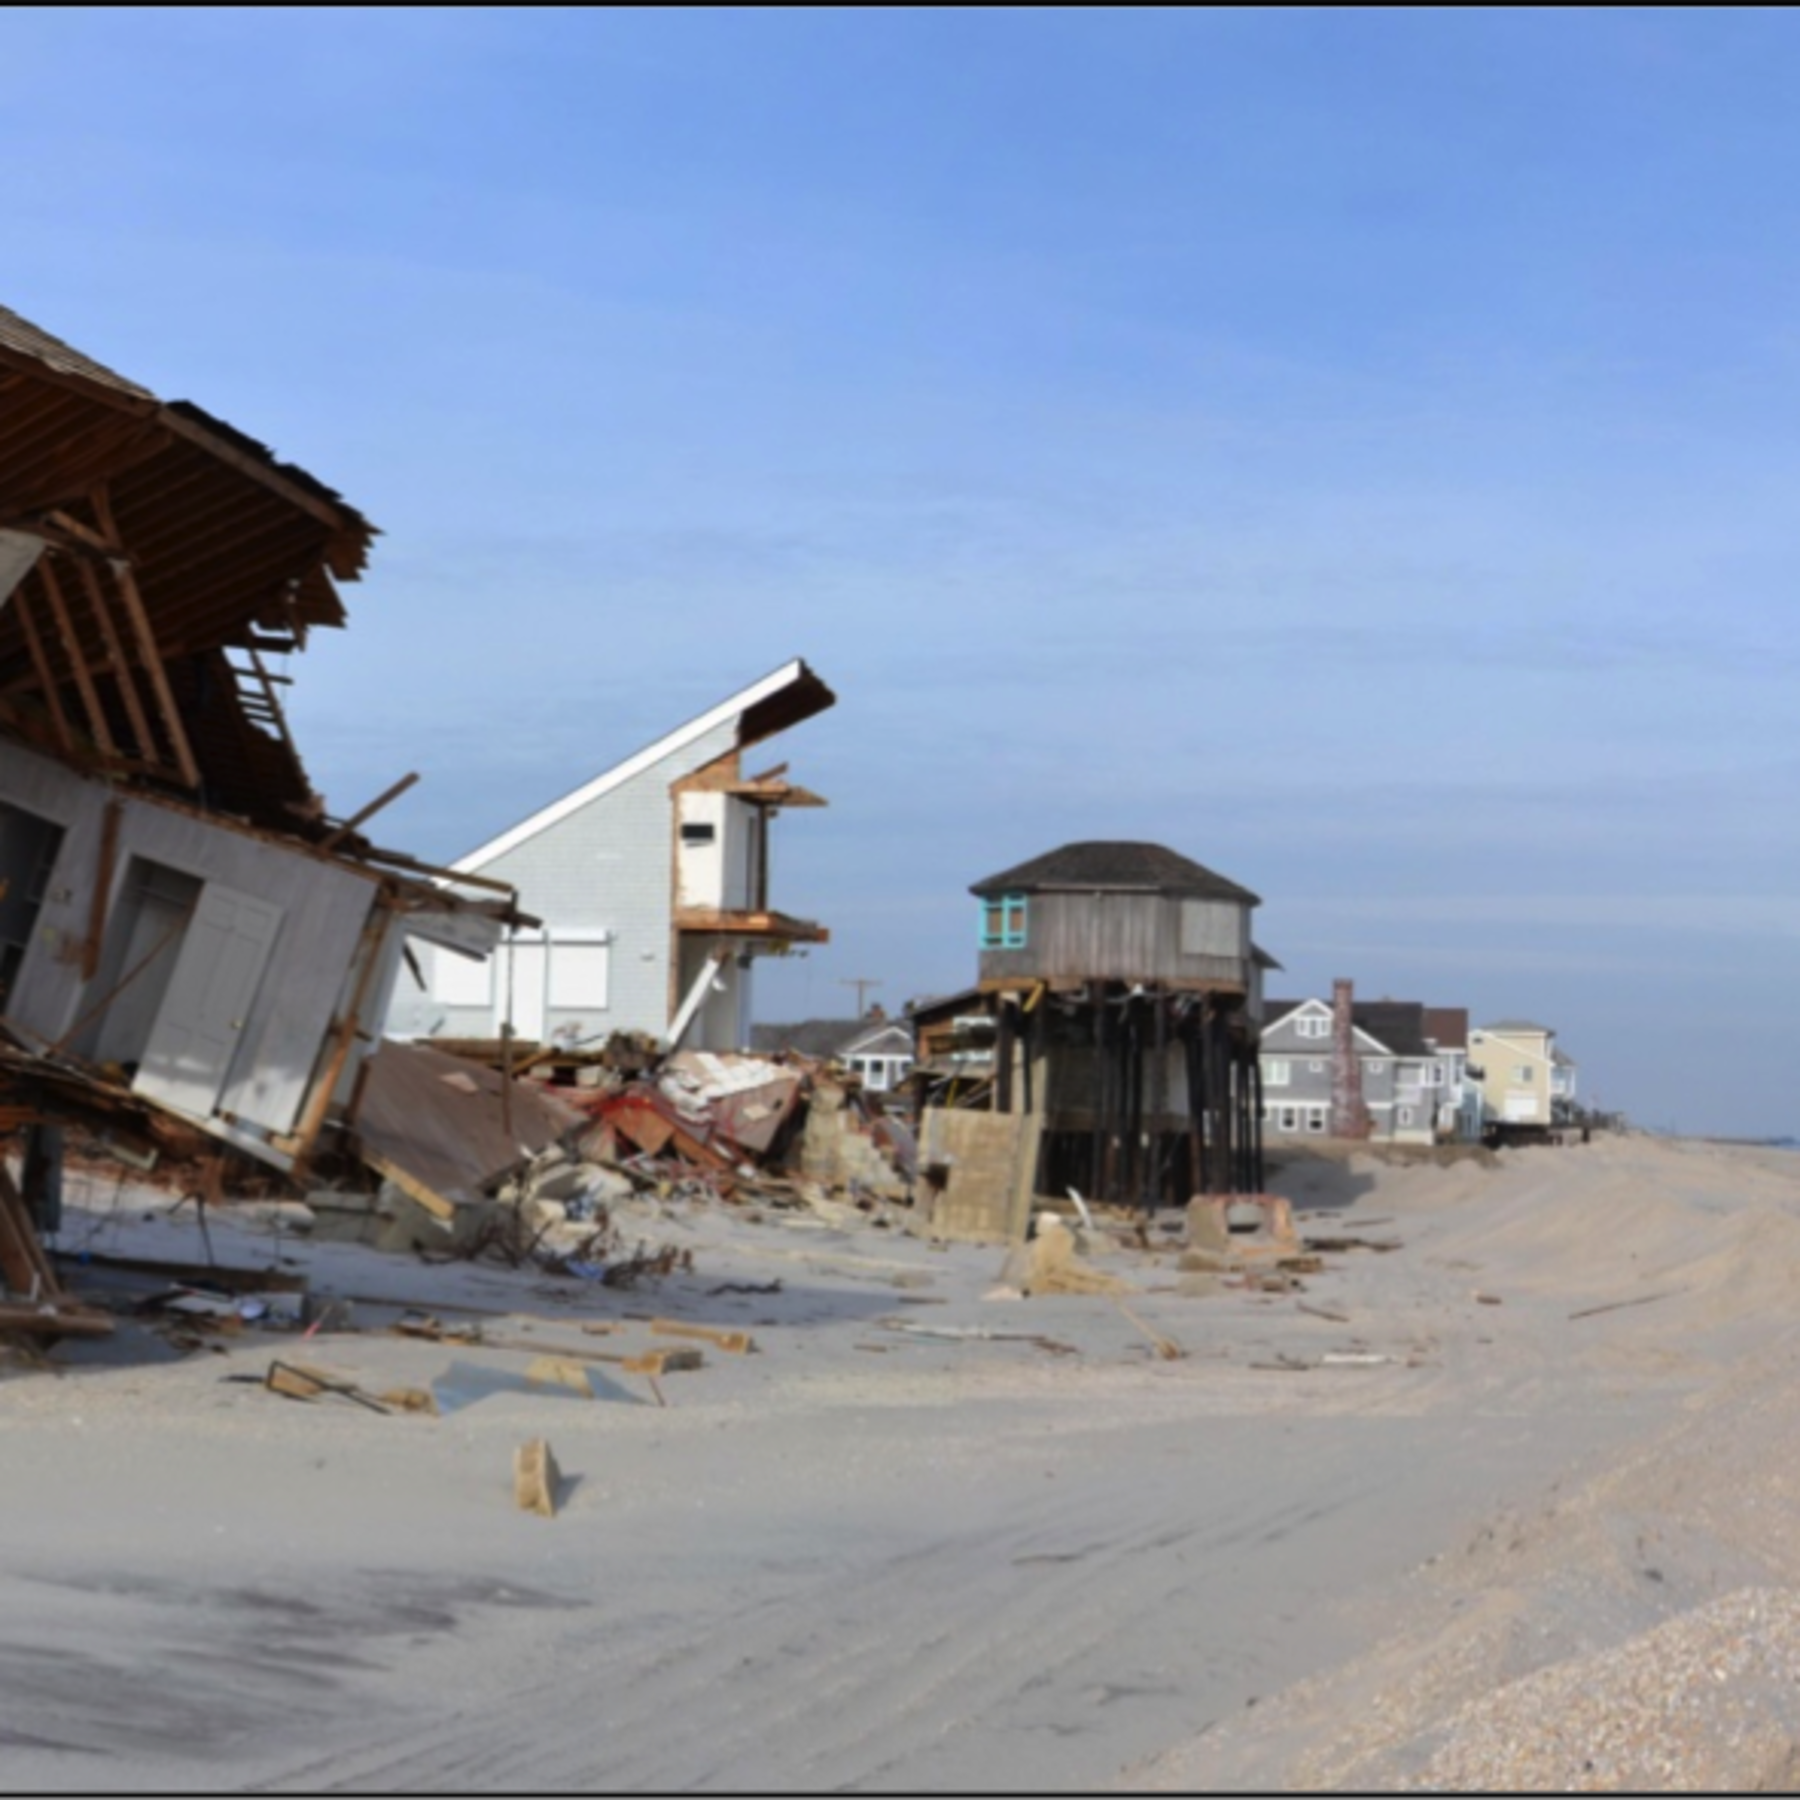 A photo of a destroyed house on the beach